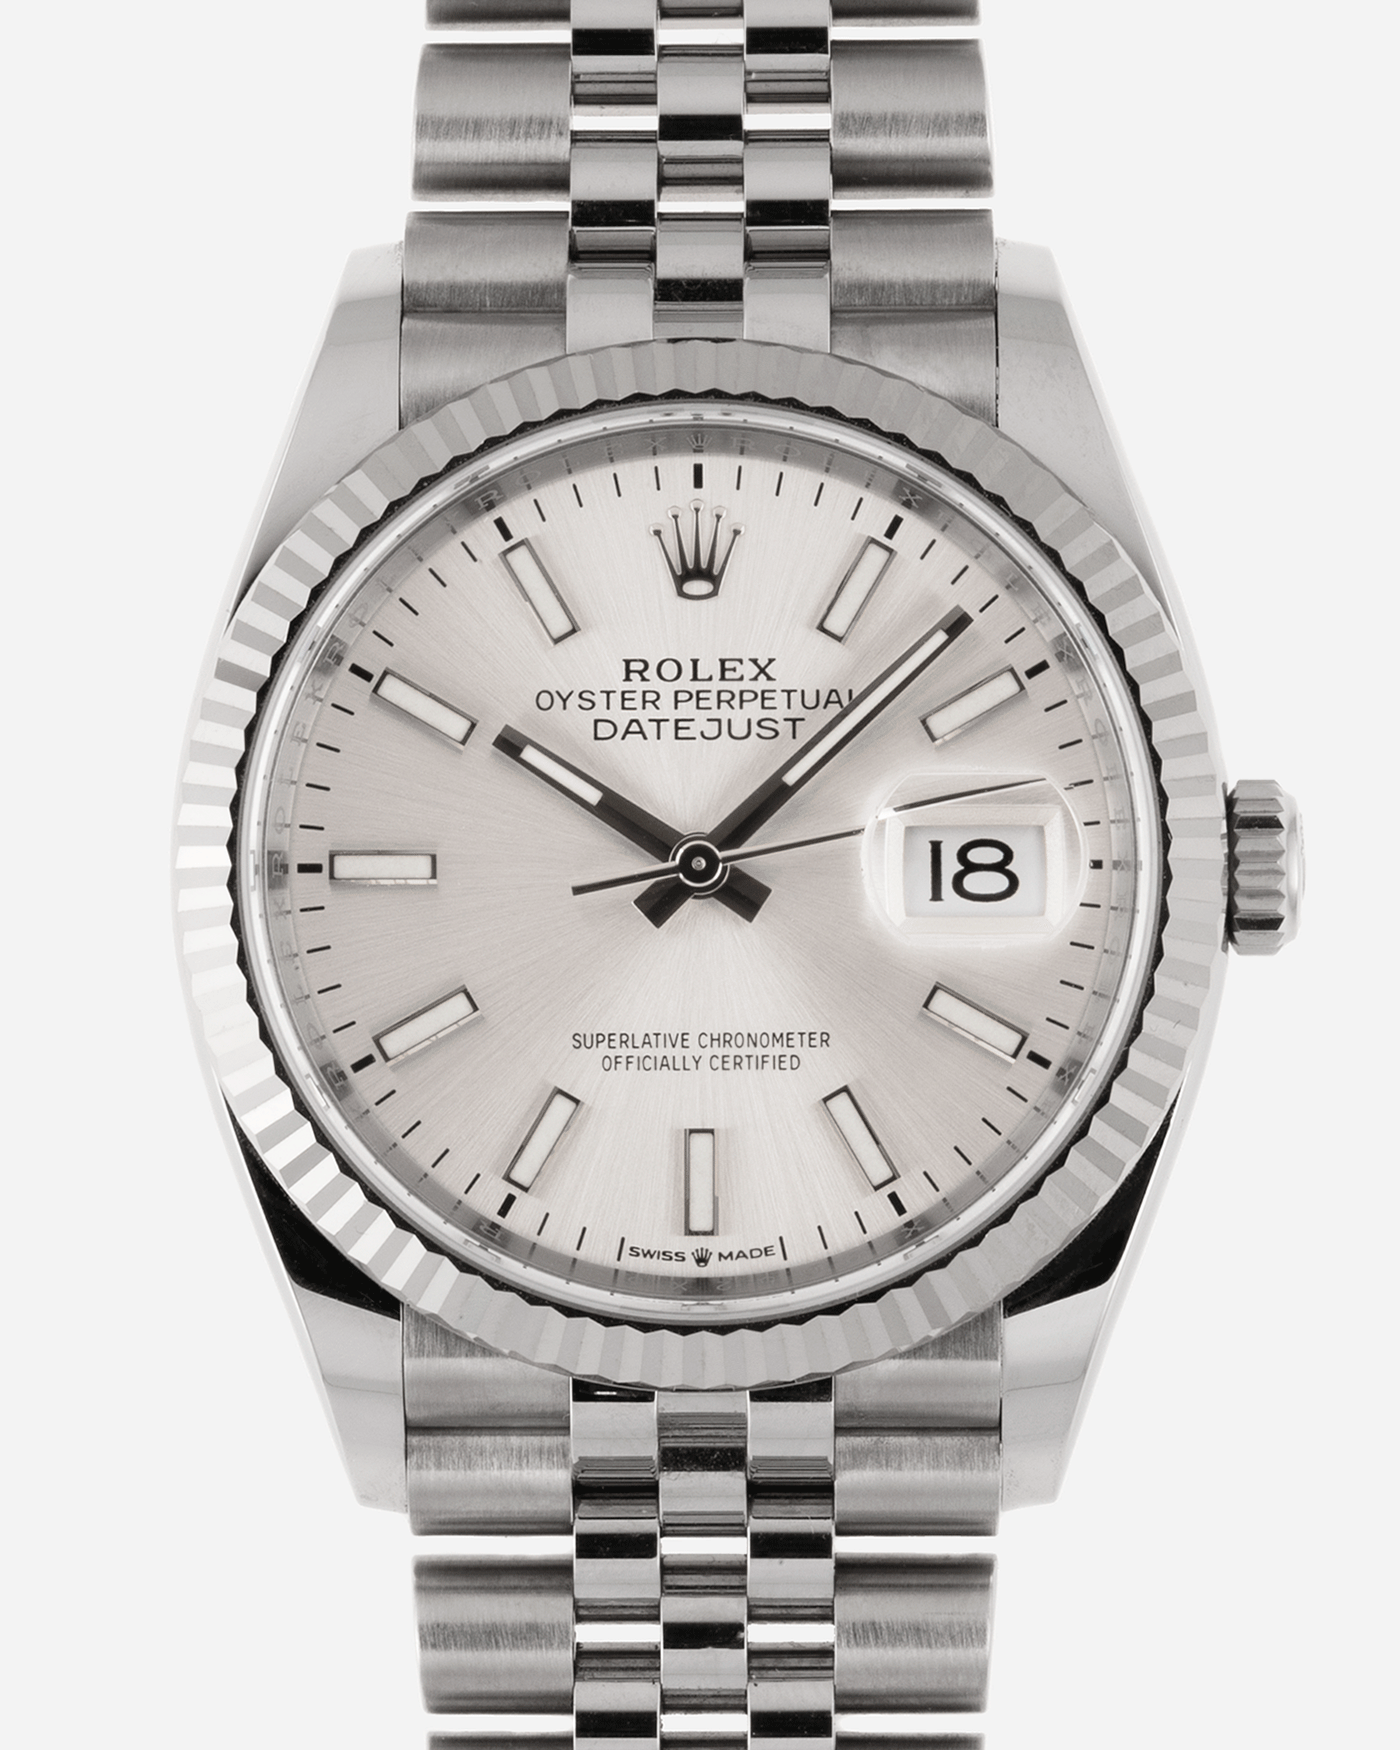 Brand: Rolex Year: 2019 Model: Datejust Reference Number: 126234 Material: 904L Stainless Steel Movement: Cal. 3235 Case Diameter: 36mm Bracelet: Stainless Steel Rolex Jubilee Bracelet